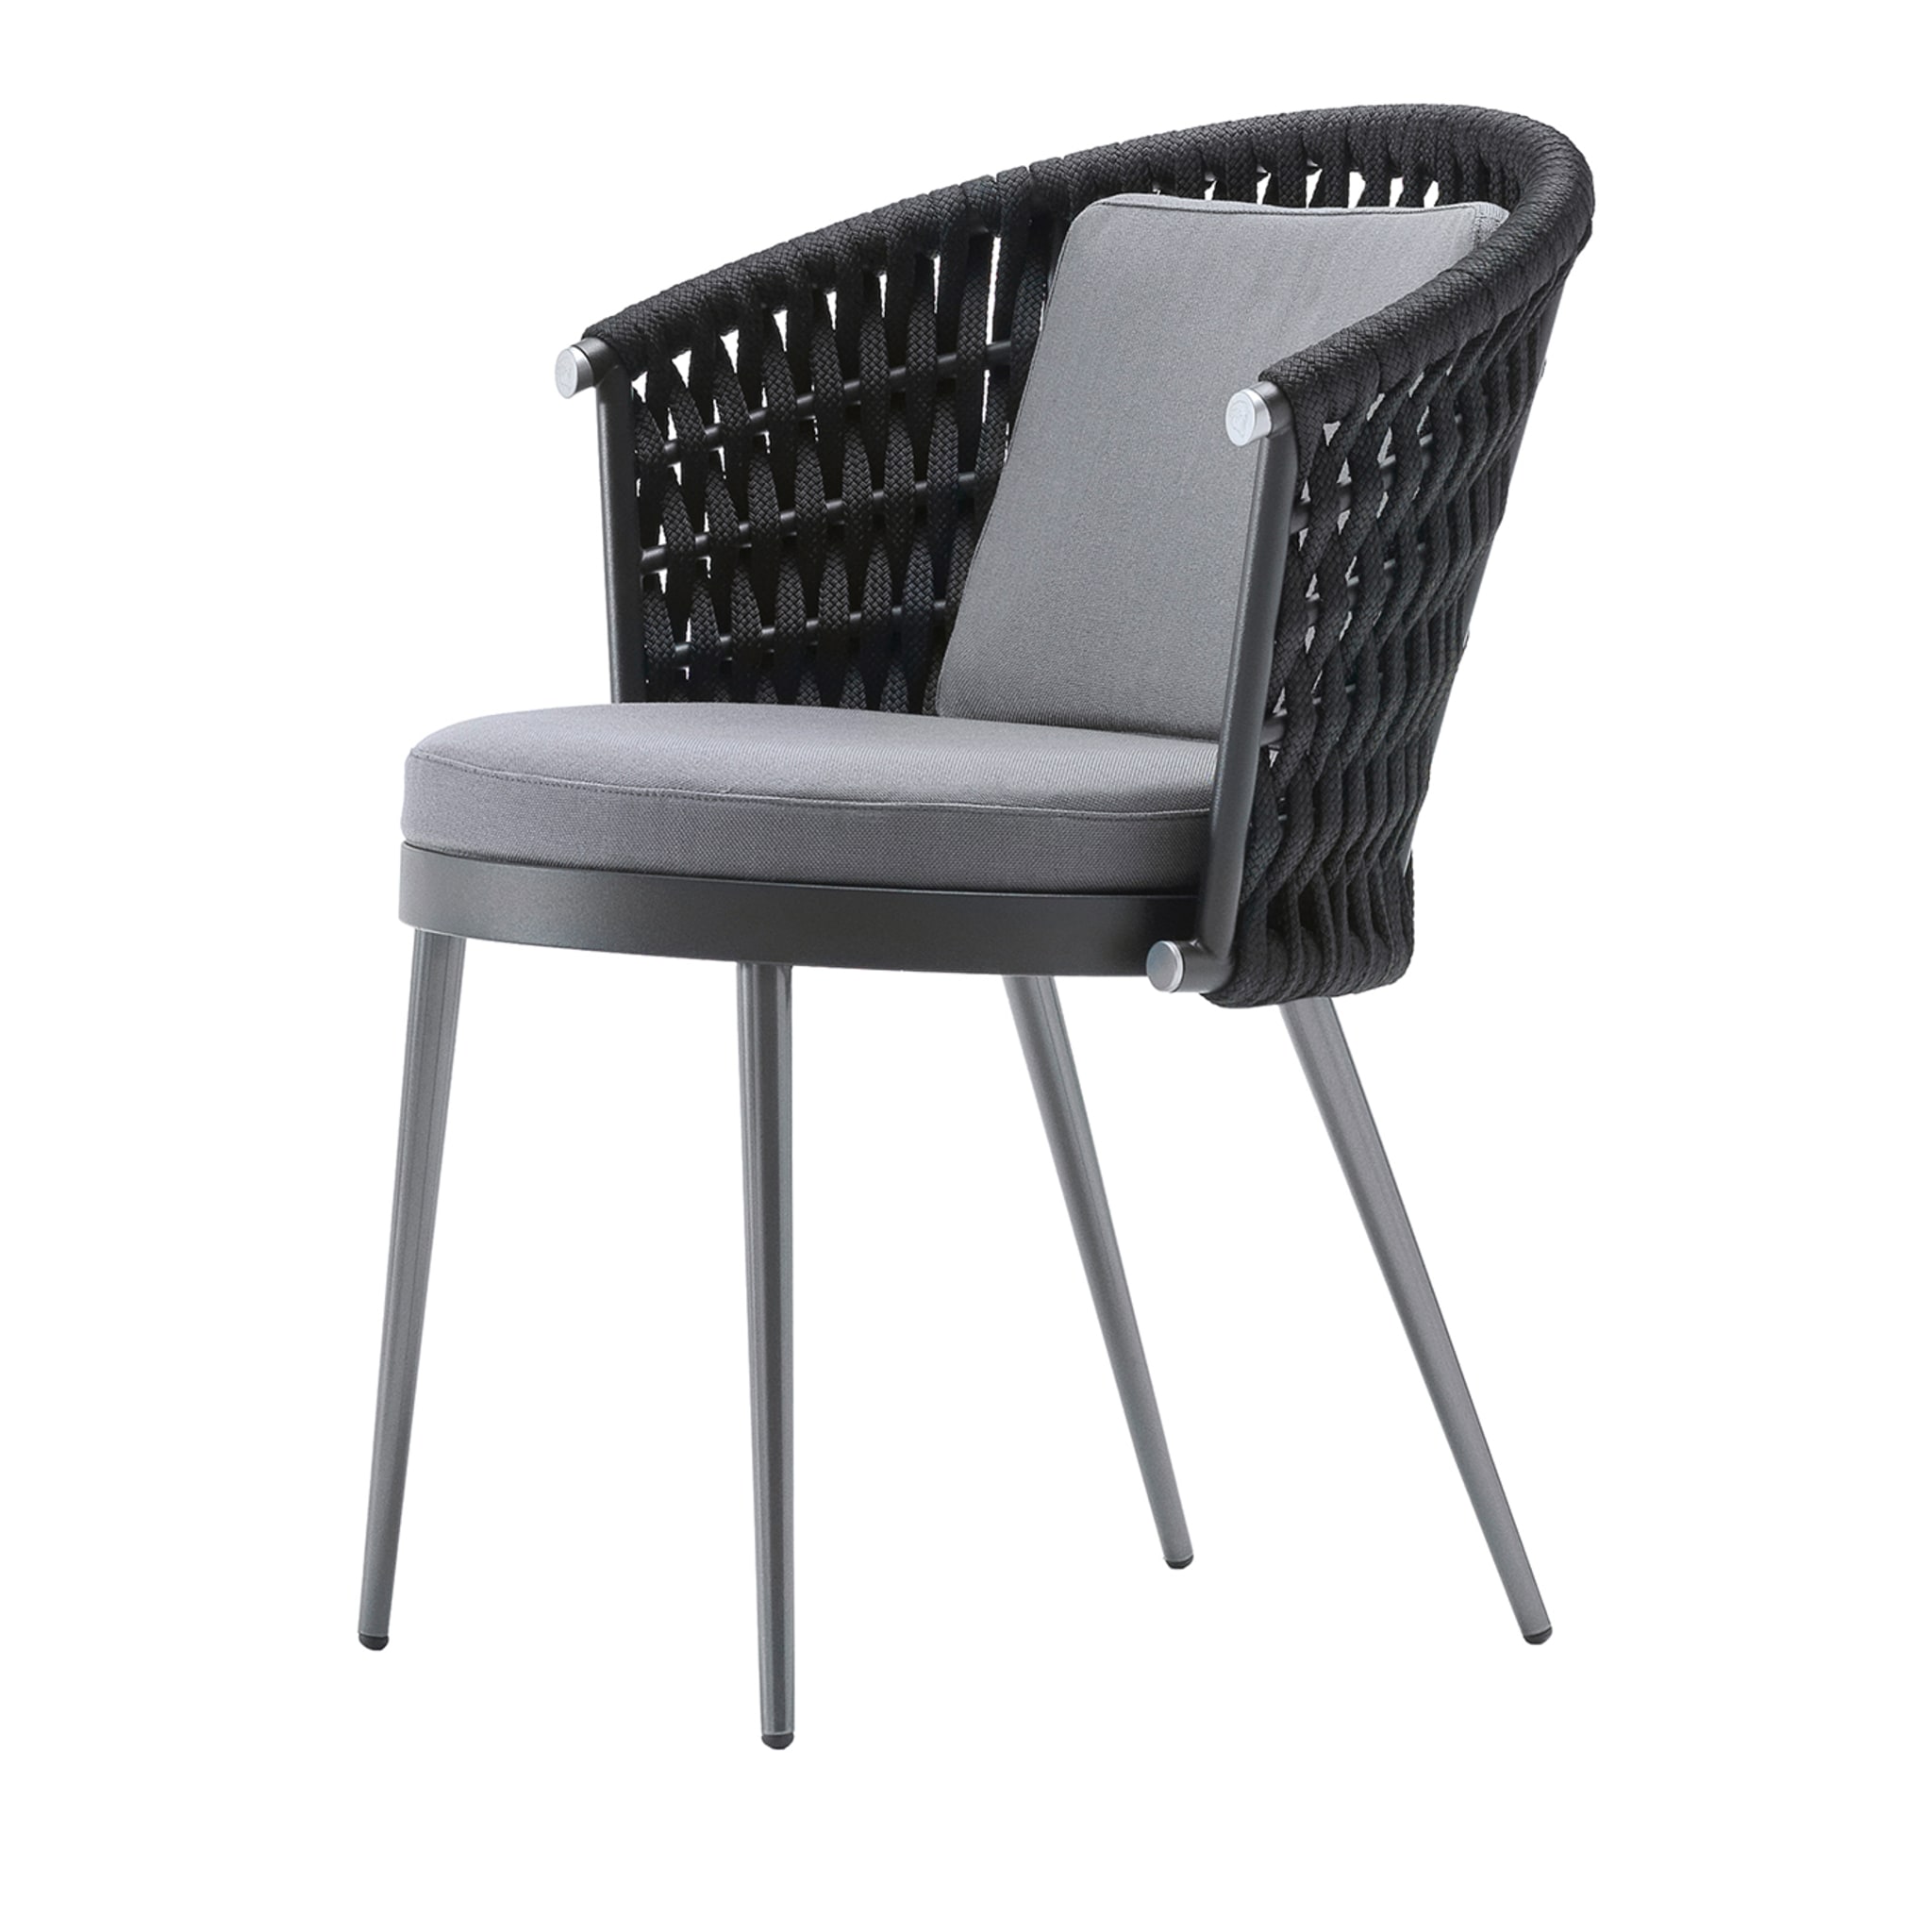 Black Outdoor fabric Chair with cushion - Main view